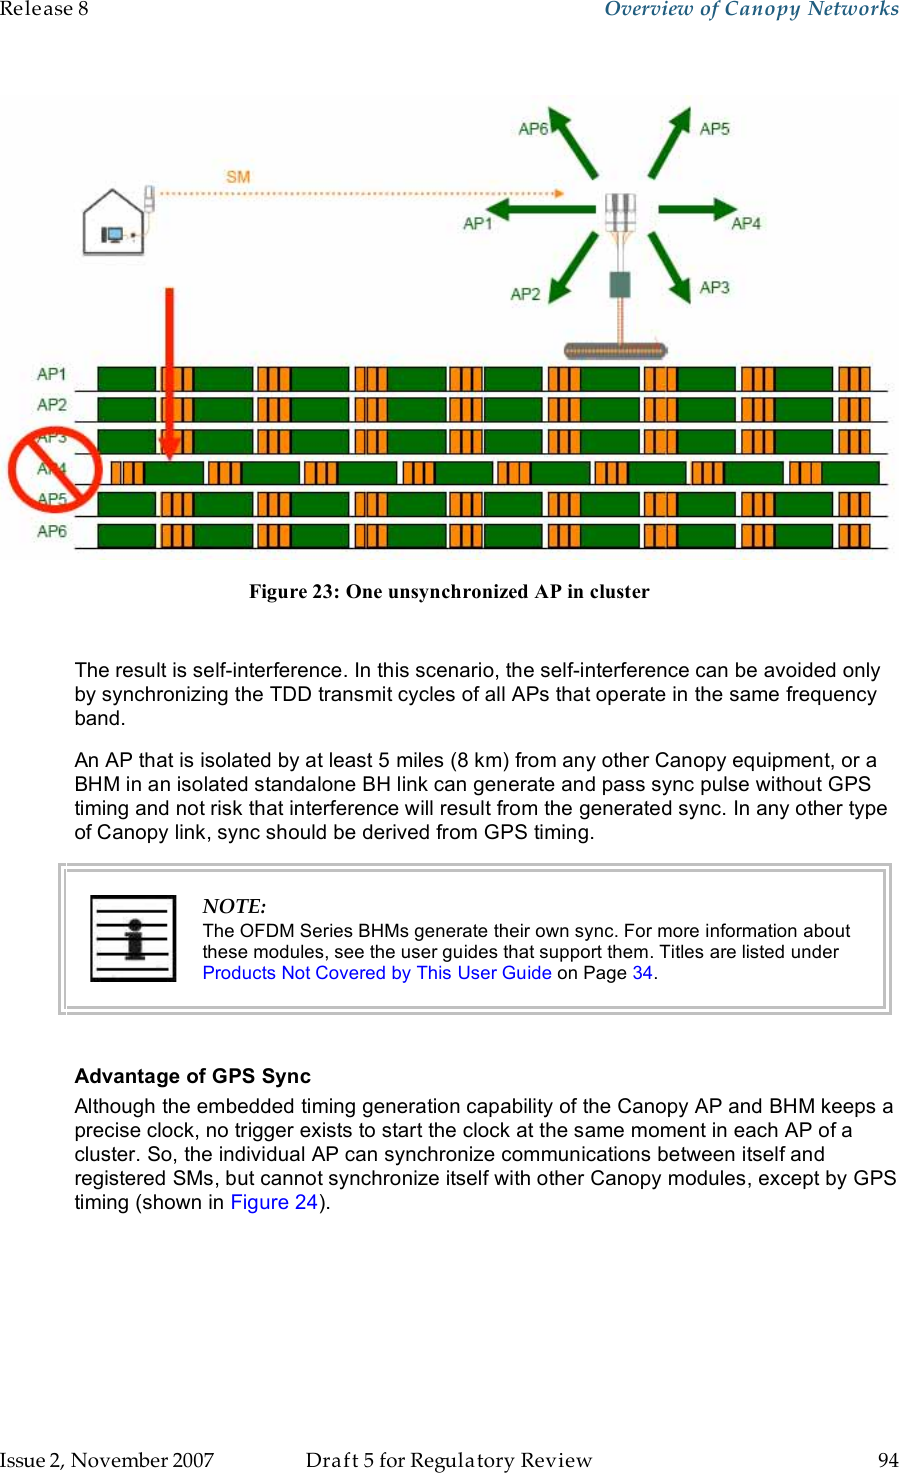 Release 8    Overview of Canopy Networks                  March 200                  Through Software Release 6.   Issue 2, November 2007  Draft 5 for Regulatory Review  94      Figure 23: One unsynchronized AP in cluster  The result is self-interference. In this scenario, the self-interference can be avoided only by synchronizing the TDD transmit cycles of all APs that operate in the same frequency band. An AP that is isolated by at least 5 miles (8 km) from any other Canopy equipment, or a BHM in an isolated standalone BH link can generate and pass sync pulse without GPS timing and not risk that interference will result from the generated sync. In any other type of Canopy link, sync should be derived from GPS timing.  NOTE: The OFDM Series BHMs generate their own sync. For more information about these modules, see the user guides that support them. Titles are listed under Products Not Covered by This User Guide on Page 34.  Advantage of GPS Sync Although the embedded timing generation capability of the Canopy AP and BHM keeps a precise clock, no trigger exists to start the clock at the same moment in each AP of a cluster. So, the individual AP can synchronize communications between itself and registered SMs, but cannot synchronize itself with other Canopy modules, except by GPS timing (shown in Figure 24). 